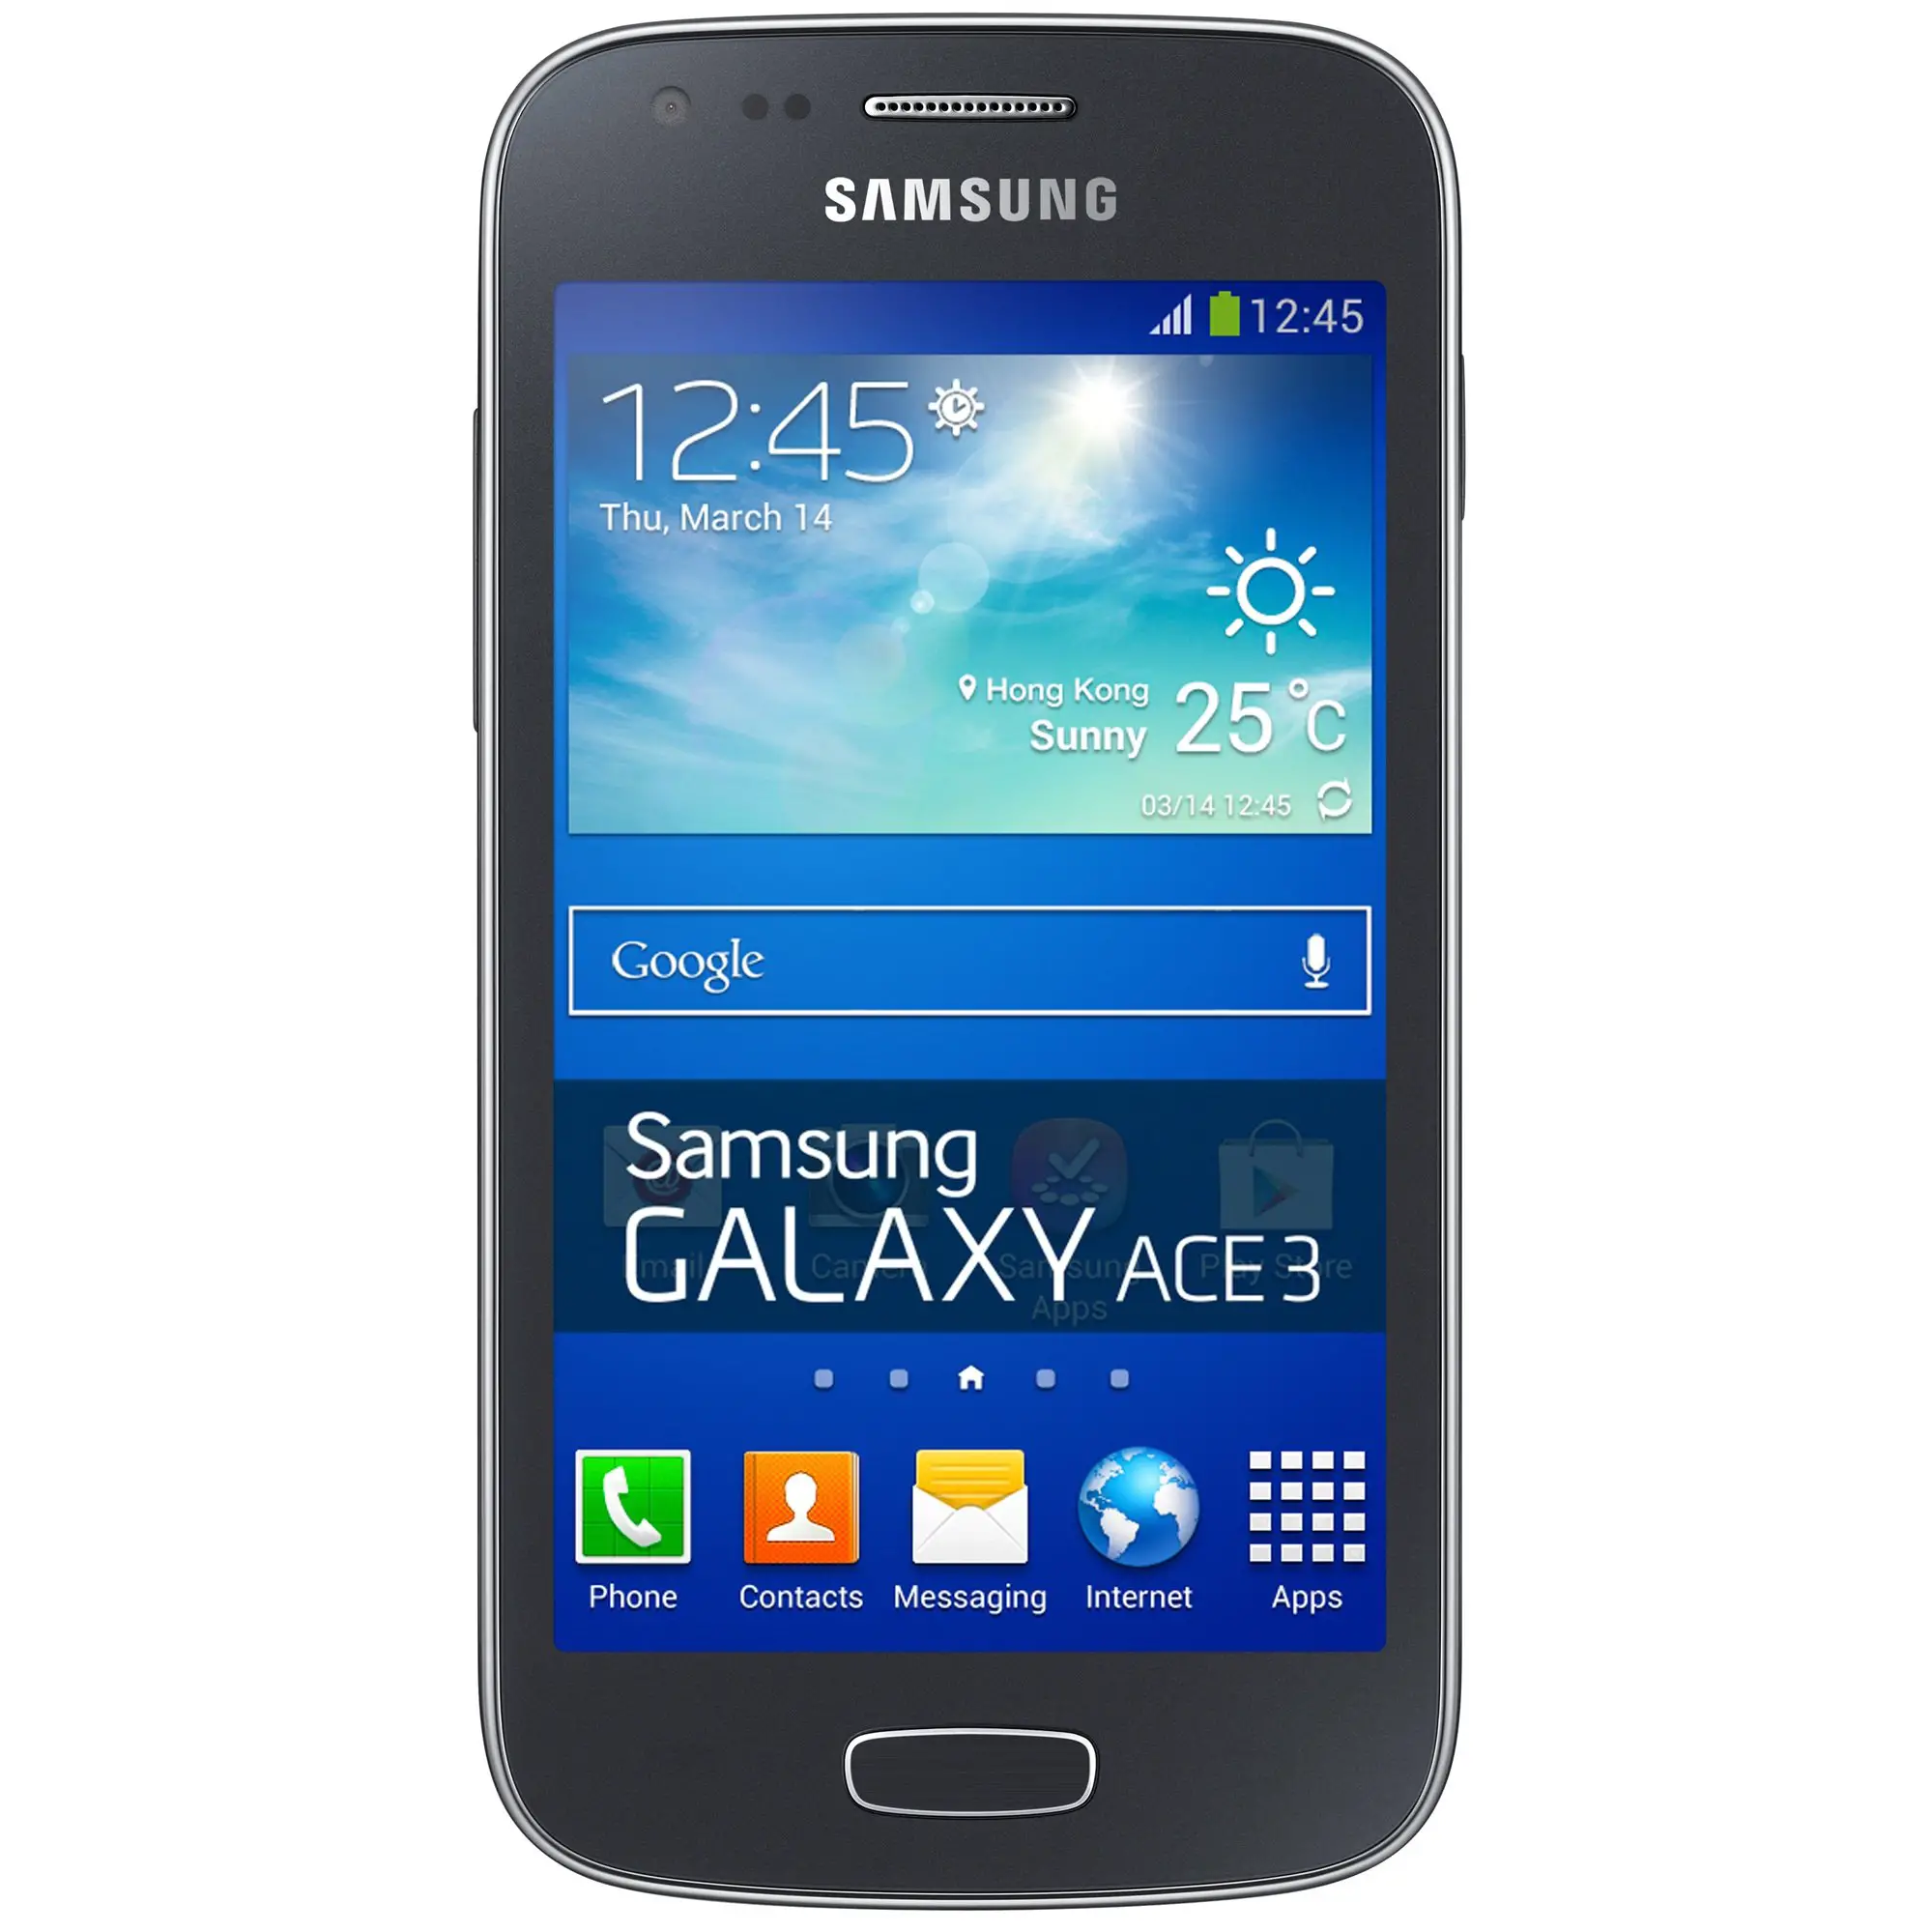 Song Transfer: Sending Songs Via Bluetooth From Samsung Galaxy Ace